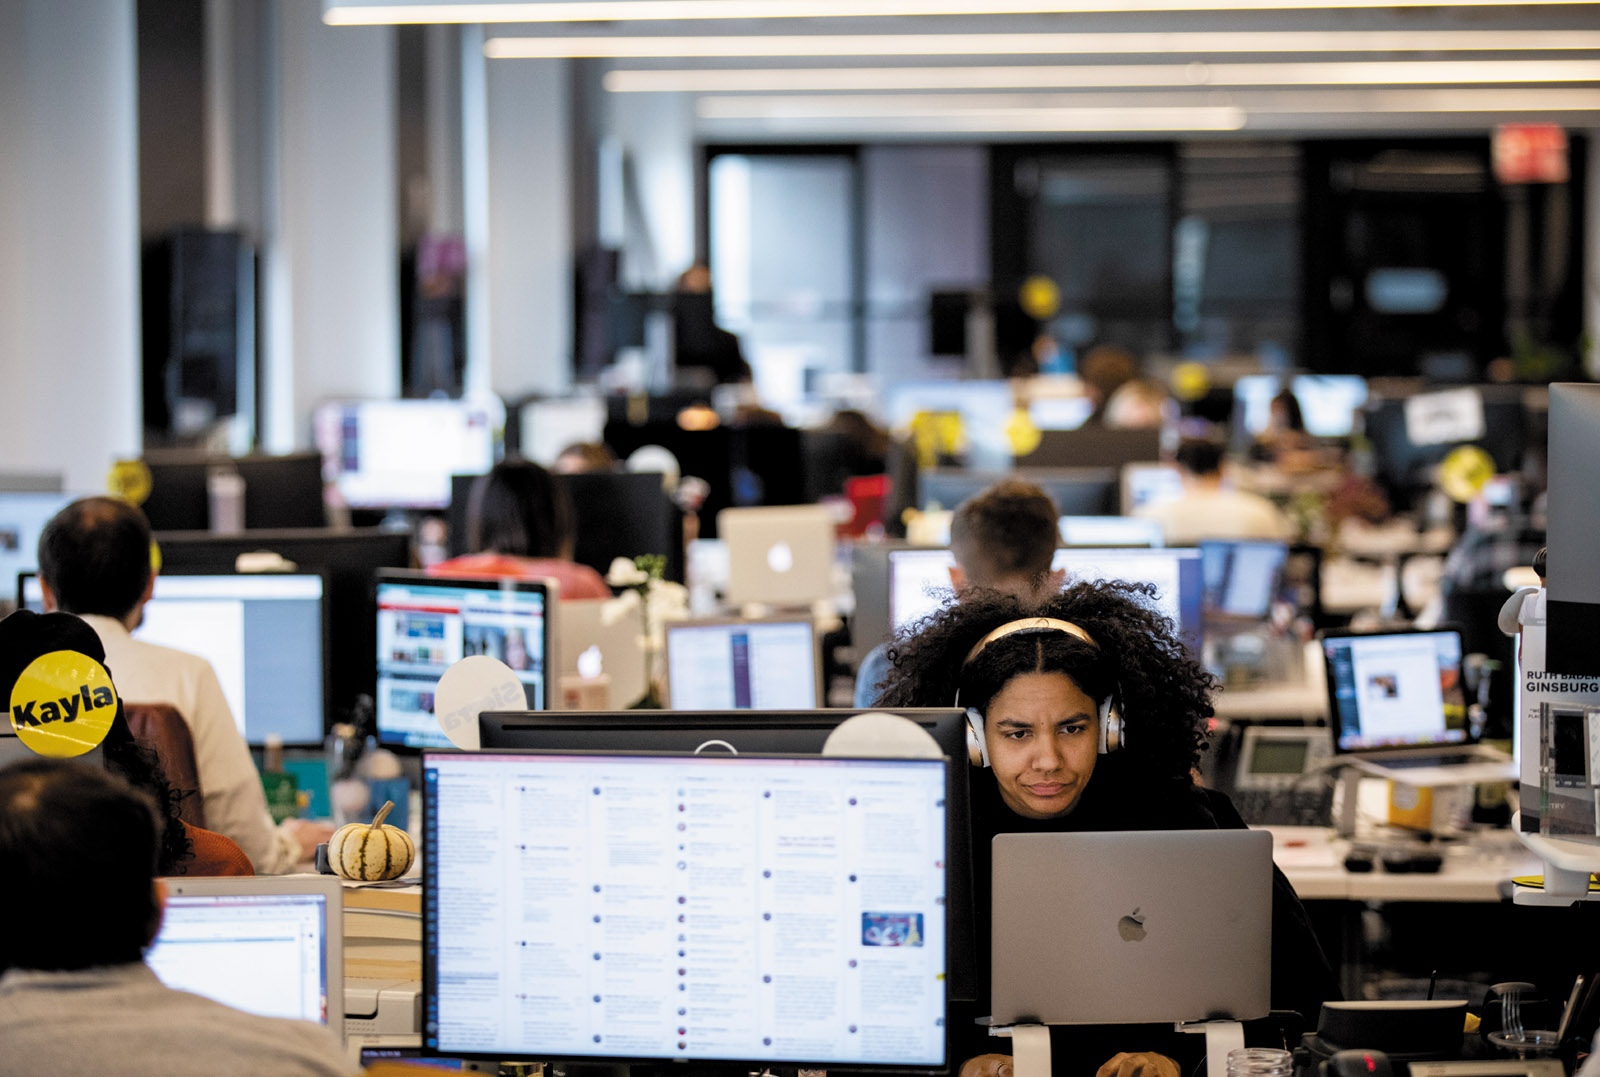 Members of the BuzzFeed staff at the company’s headquarters a month before major layoffs were announced, New York City, December 2018